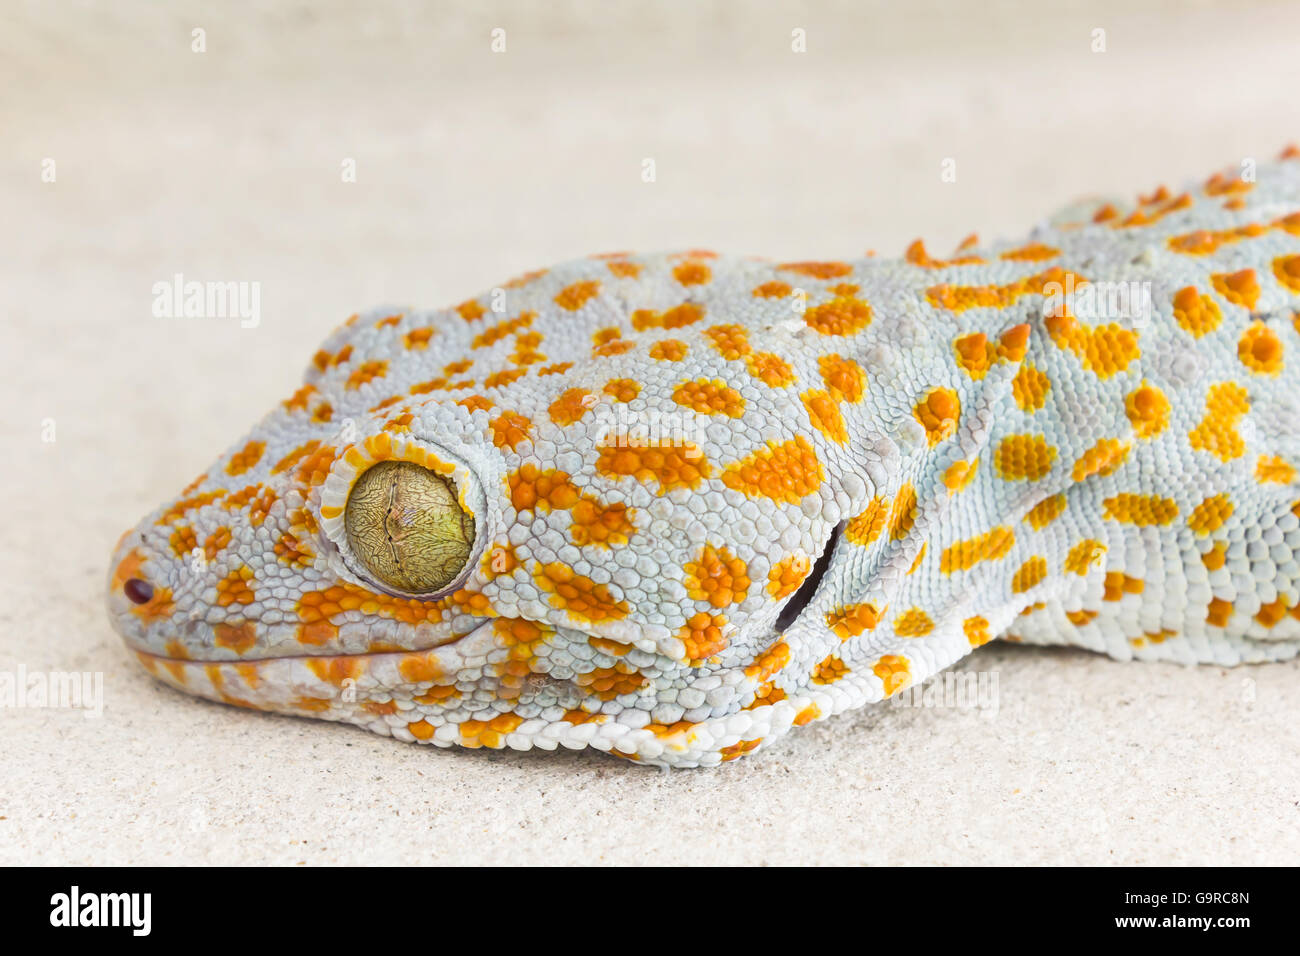 Focused eye and head gecko or gecko verticillatus, orange and grey colour dot knotted or ragged skin gecko on the floor, Gecko o Stock Photo